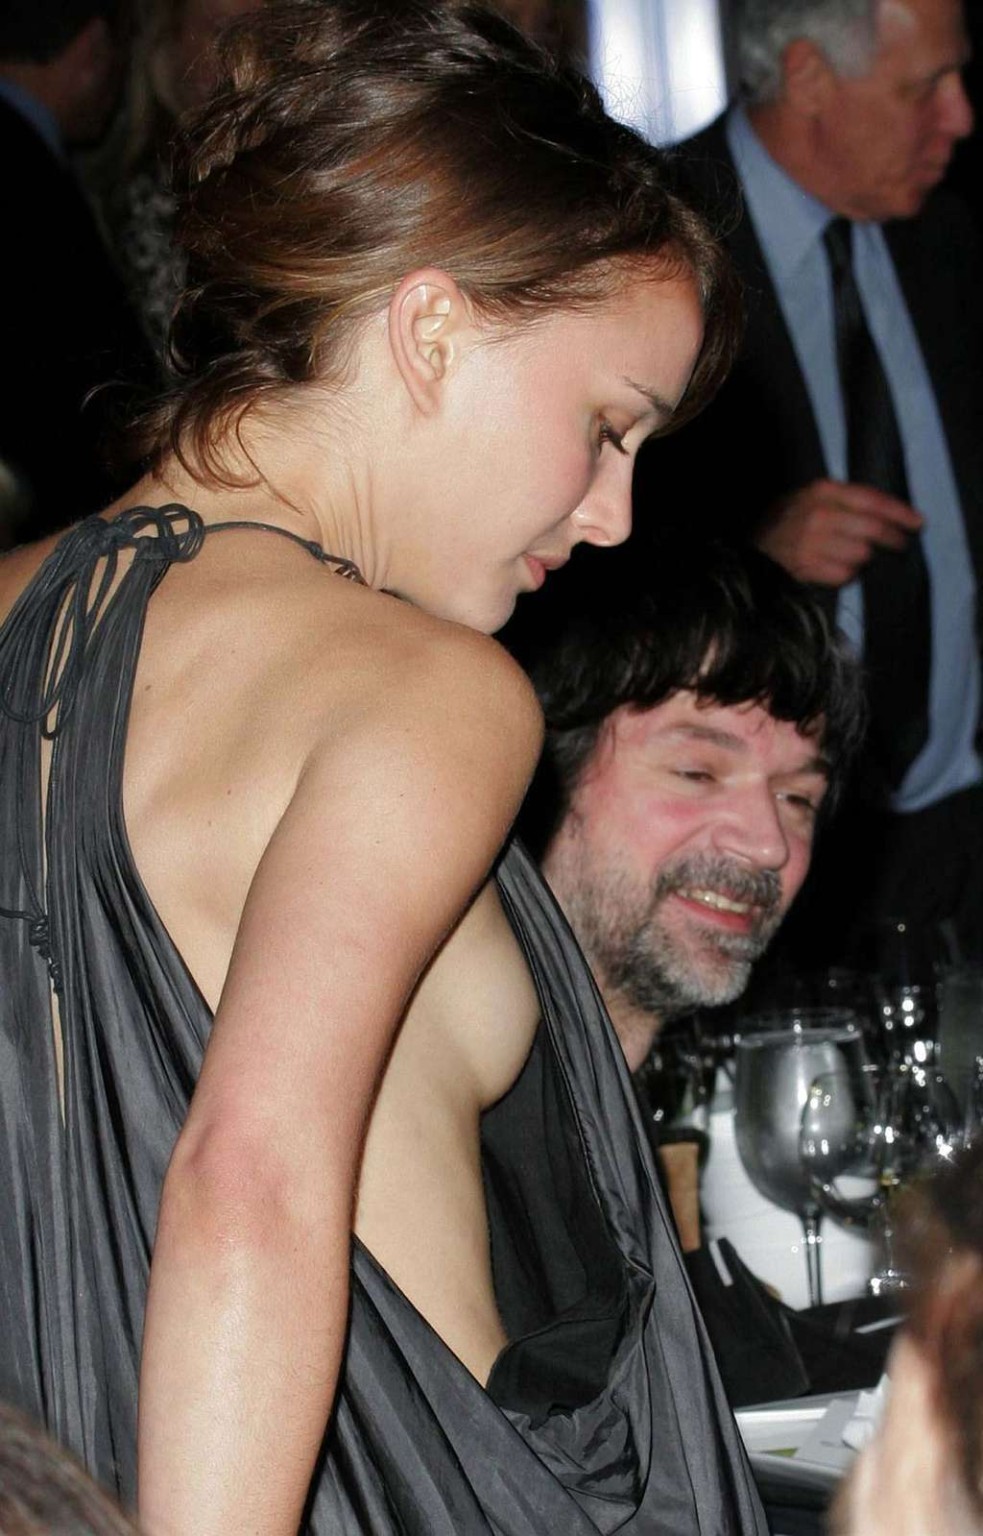 Natalie Portman exposing her nice ass in thong and tits slip paparazzi shoots #75336216